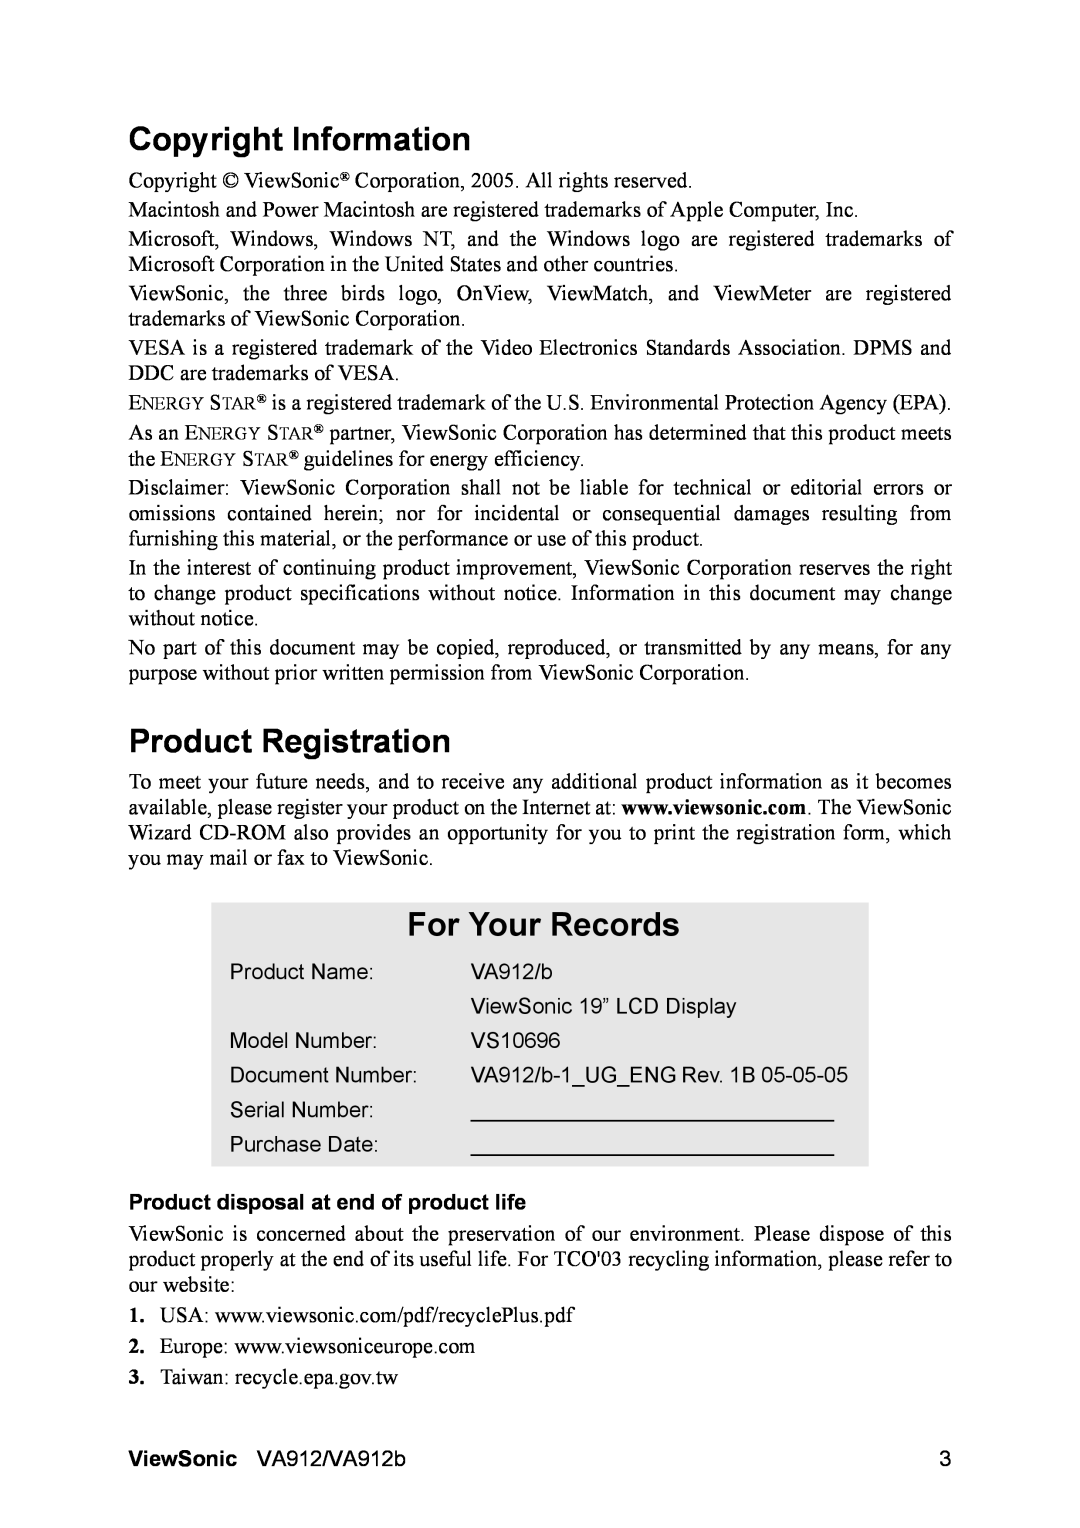 ViewSonic VA912-1 Copyright Information, Product Registration, For Your Records, Product disposal at end of product life 